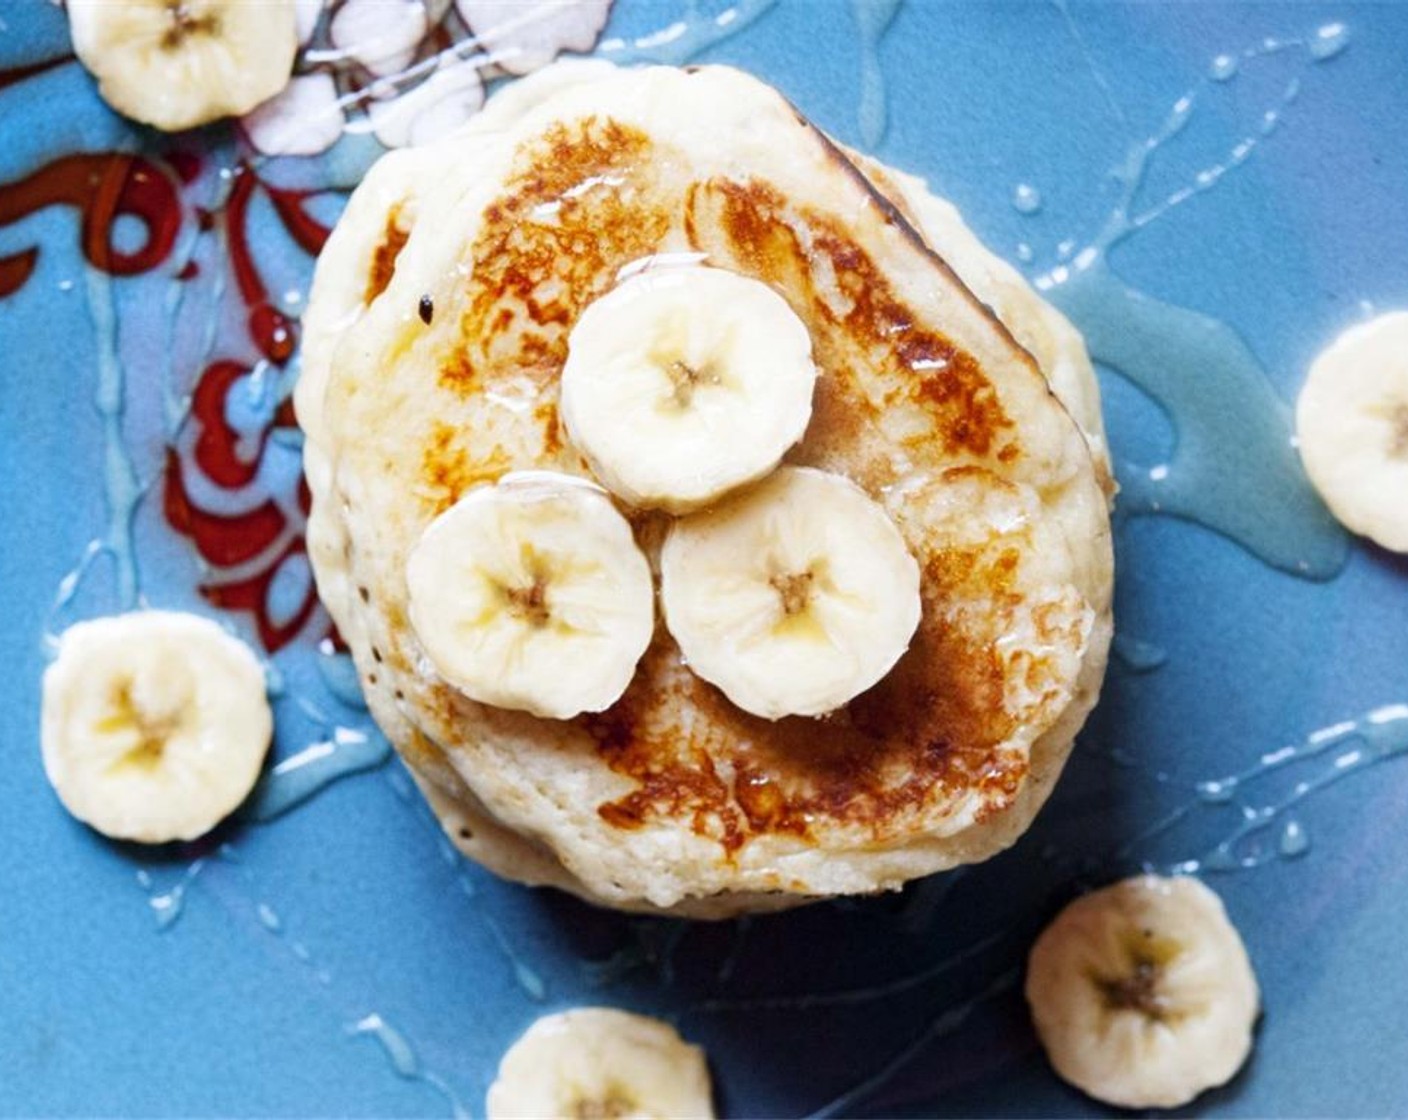 step 7 Slice up the remaining bananas and use it to decorate your pancakes. Drizzle some Maple Syrup (to taste) and serve. Enjoy!